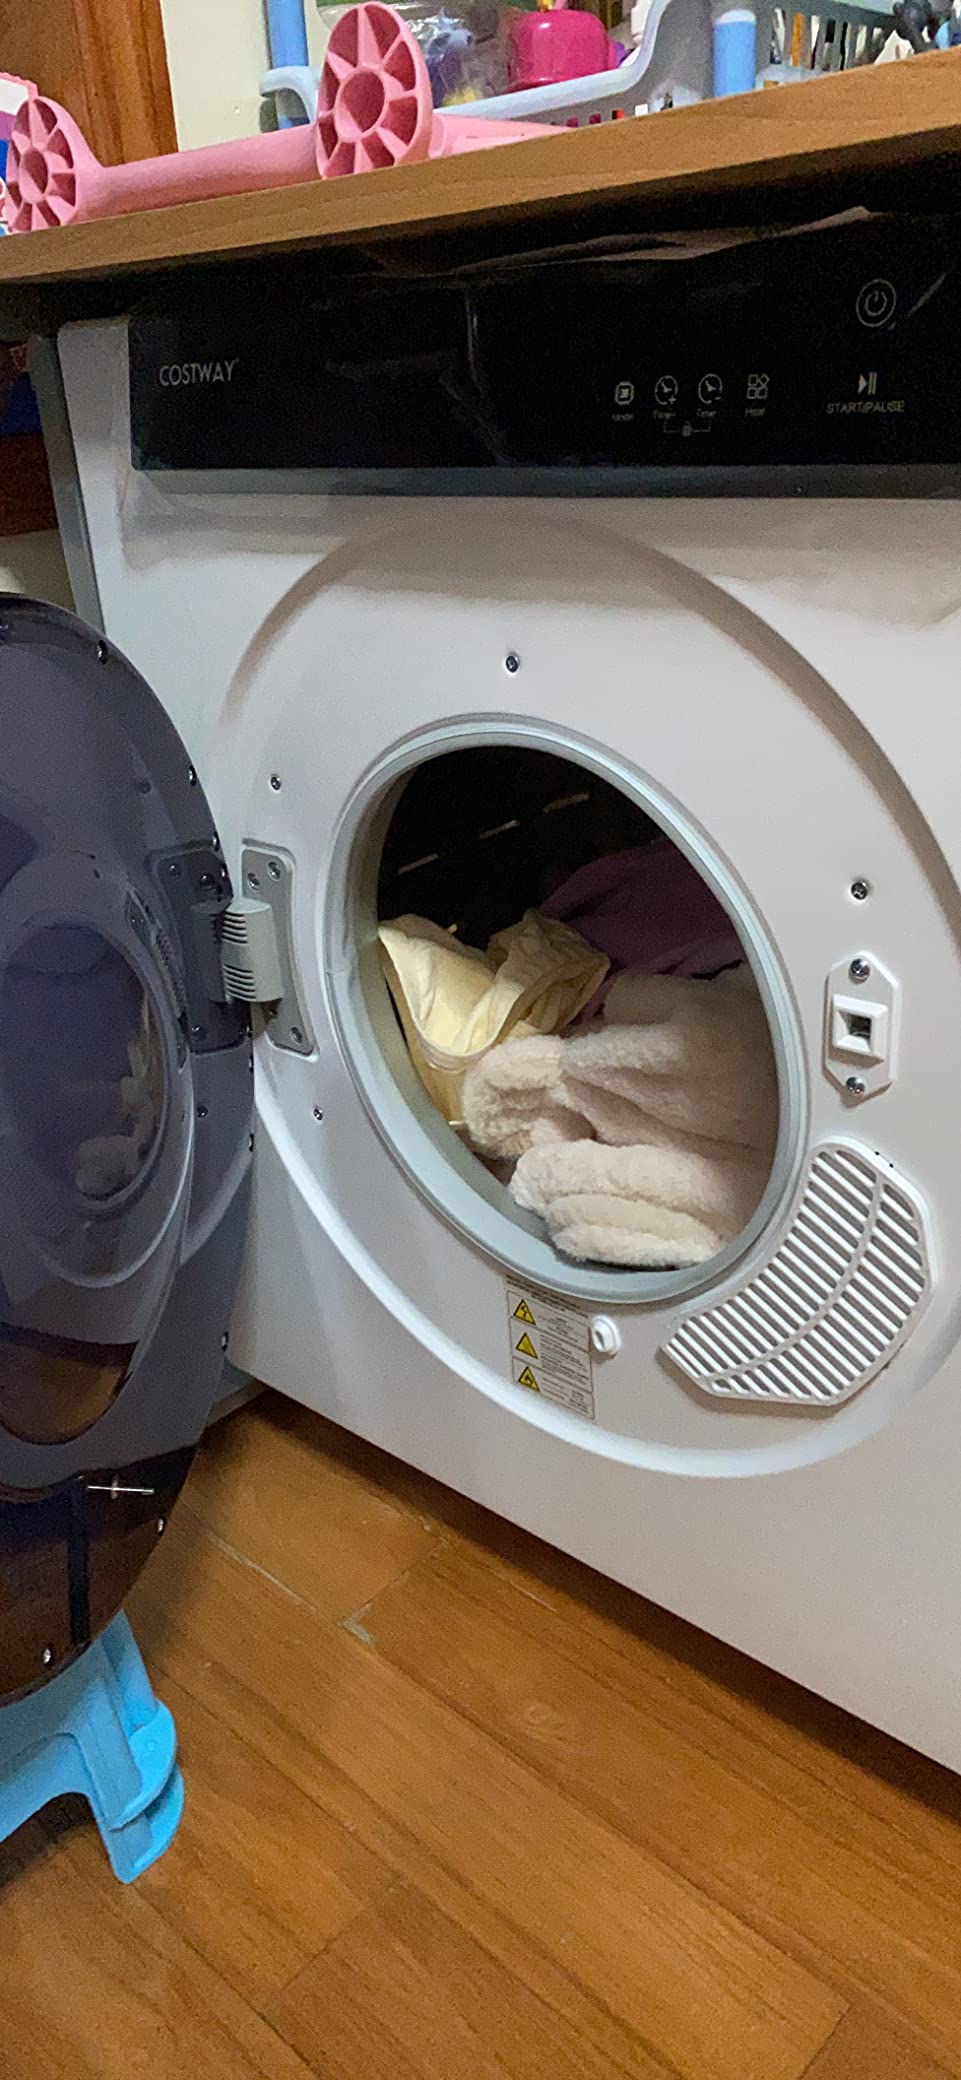 1500W Compact Laundry Dryer with Touch Panel